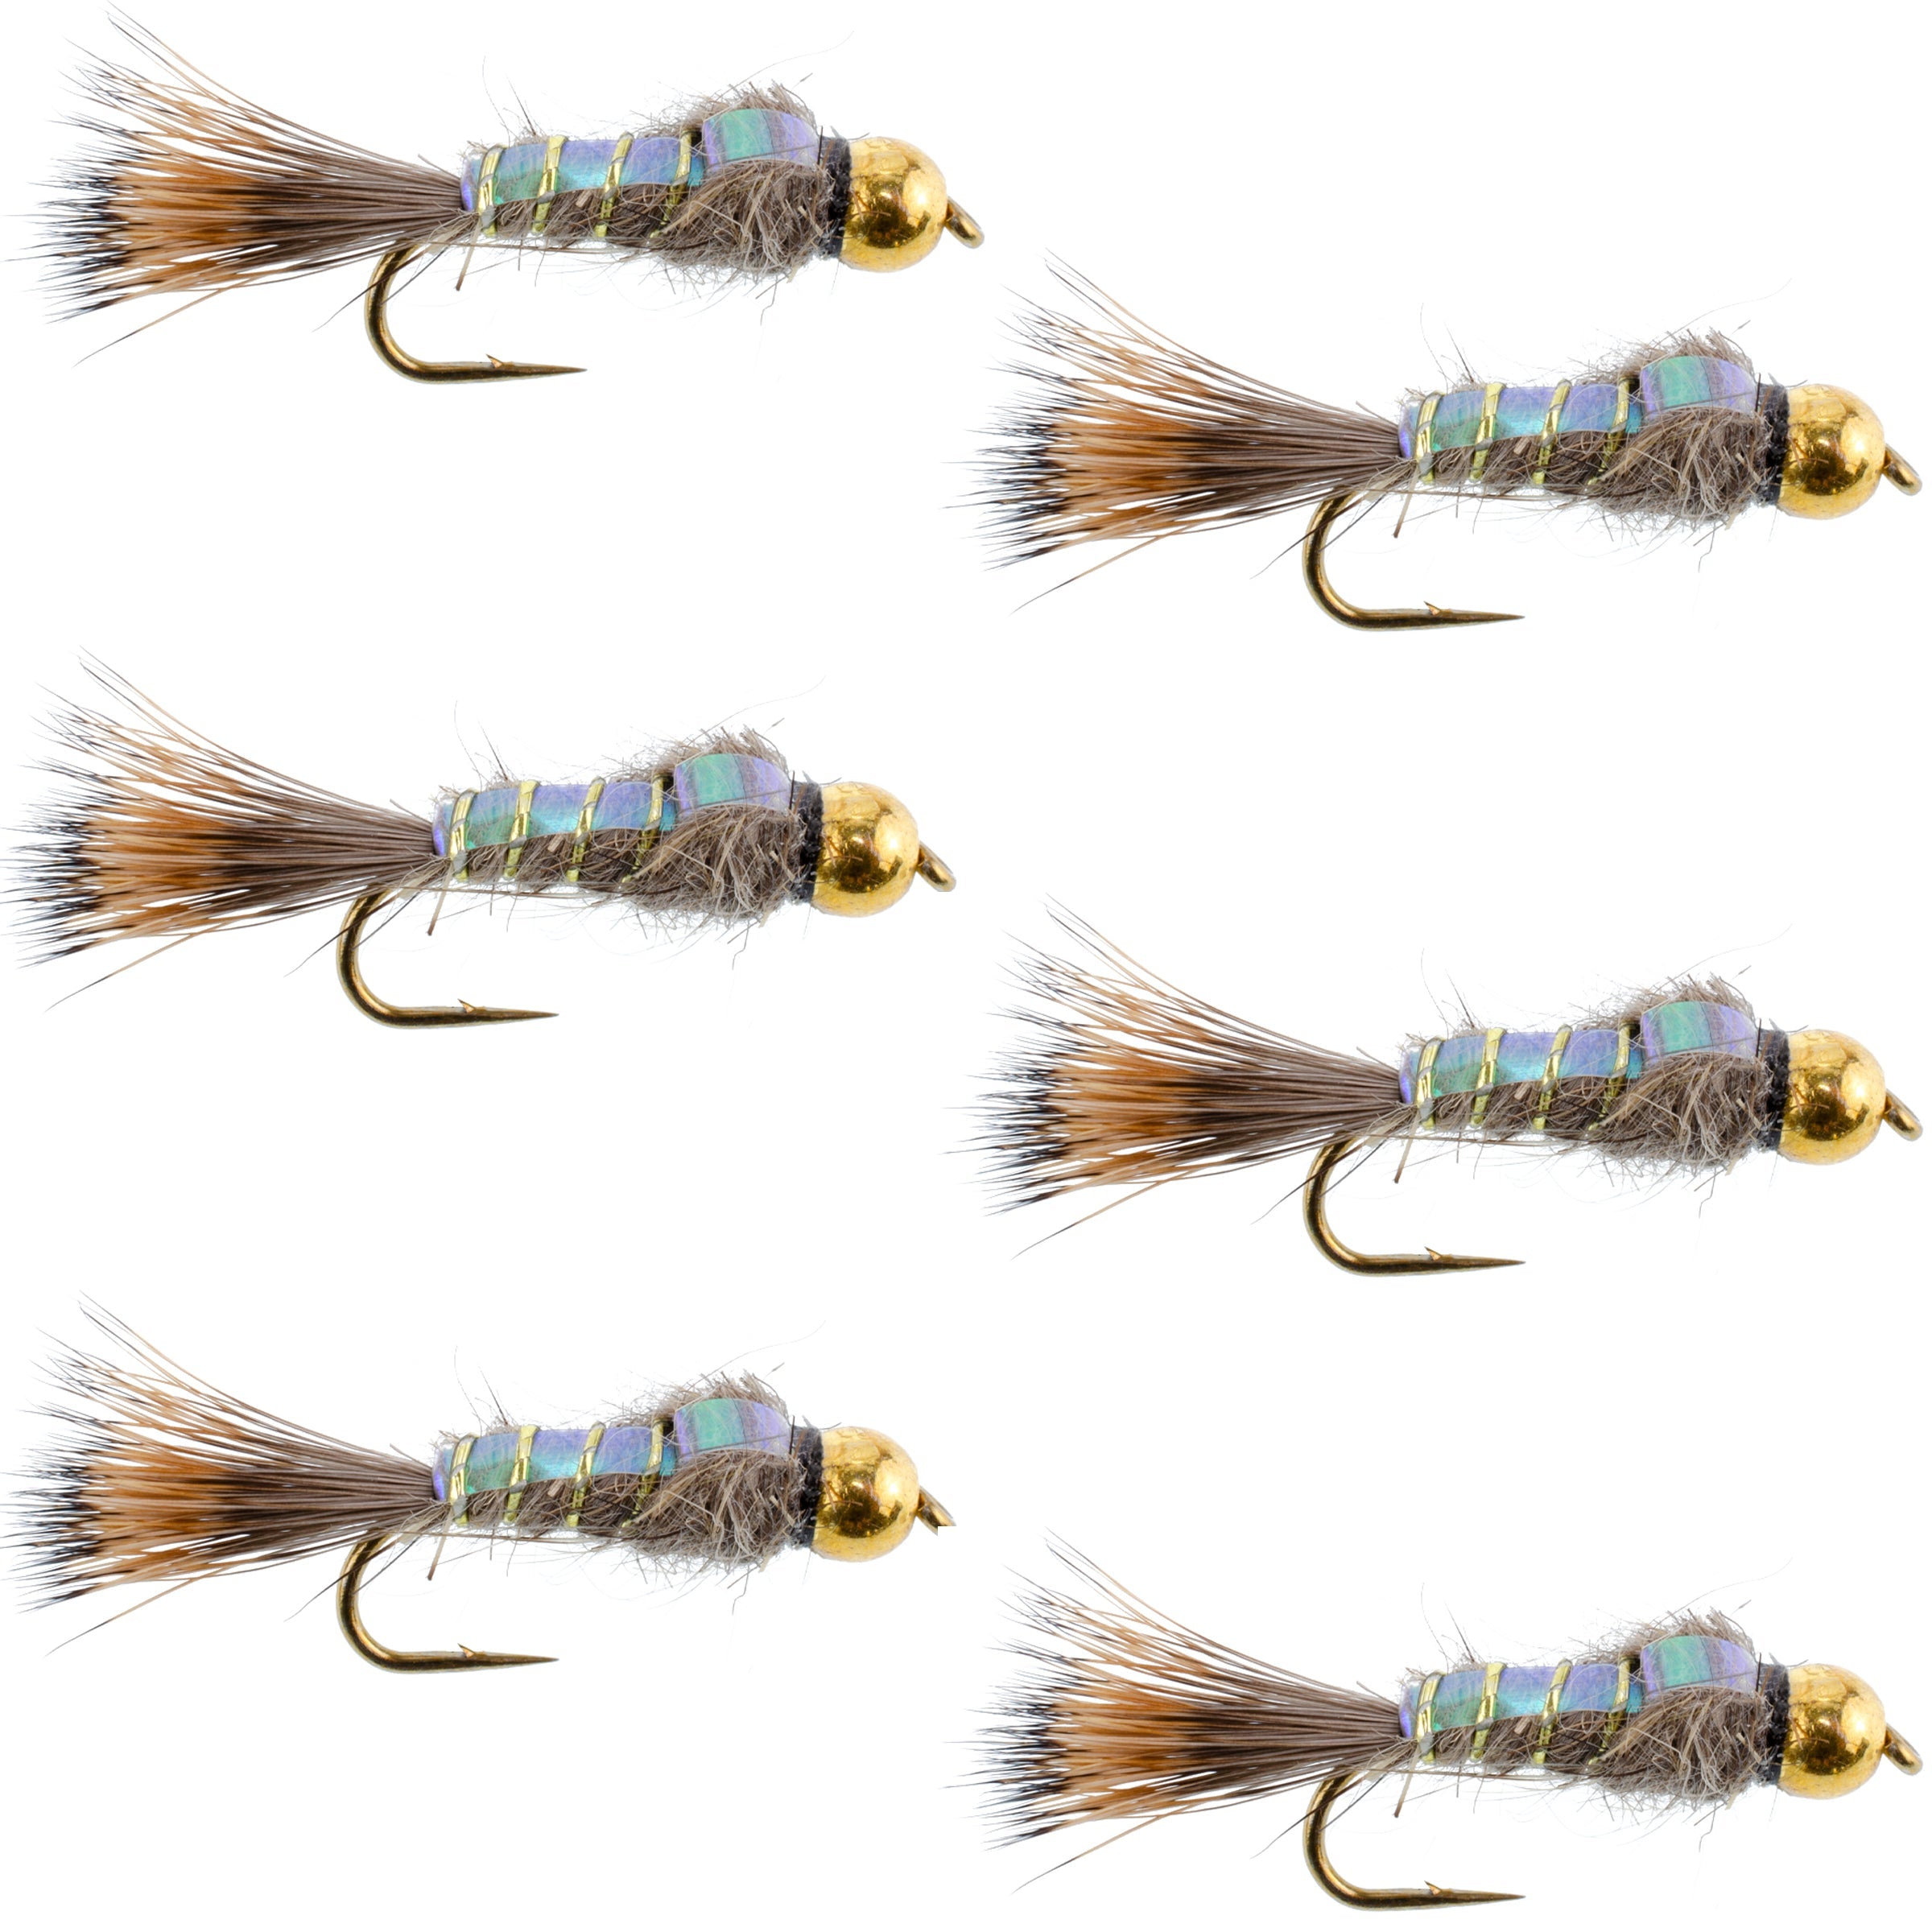 Tungsten Bead Head Nymph Fly Fishing Flies - Flashback Gold Ribbed Hare's Ear Trout Fly - Nymph Wet Fly - 6 Flies Hook Size 14